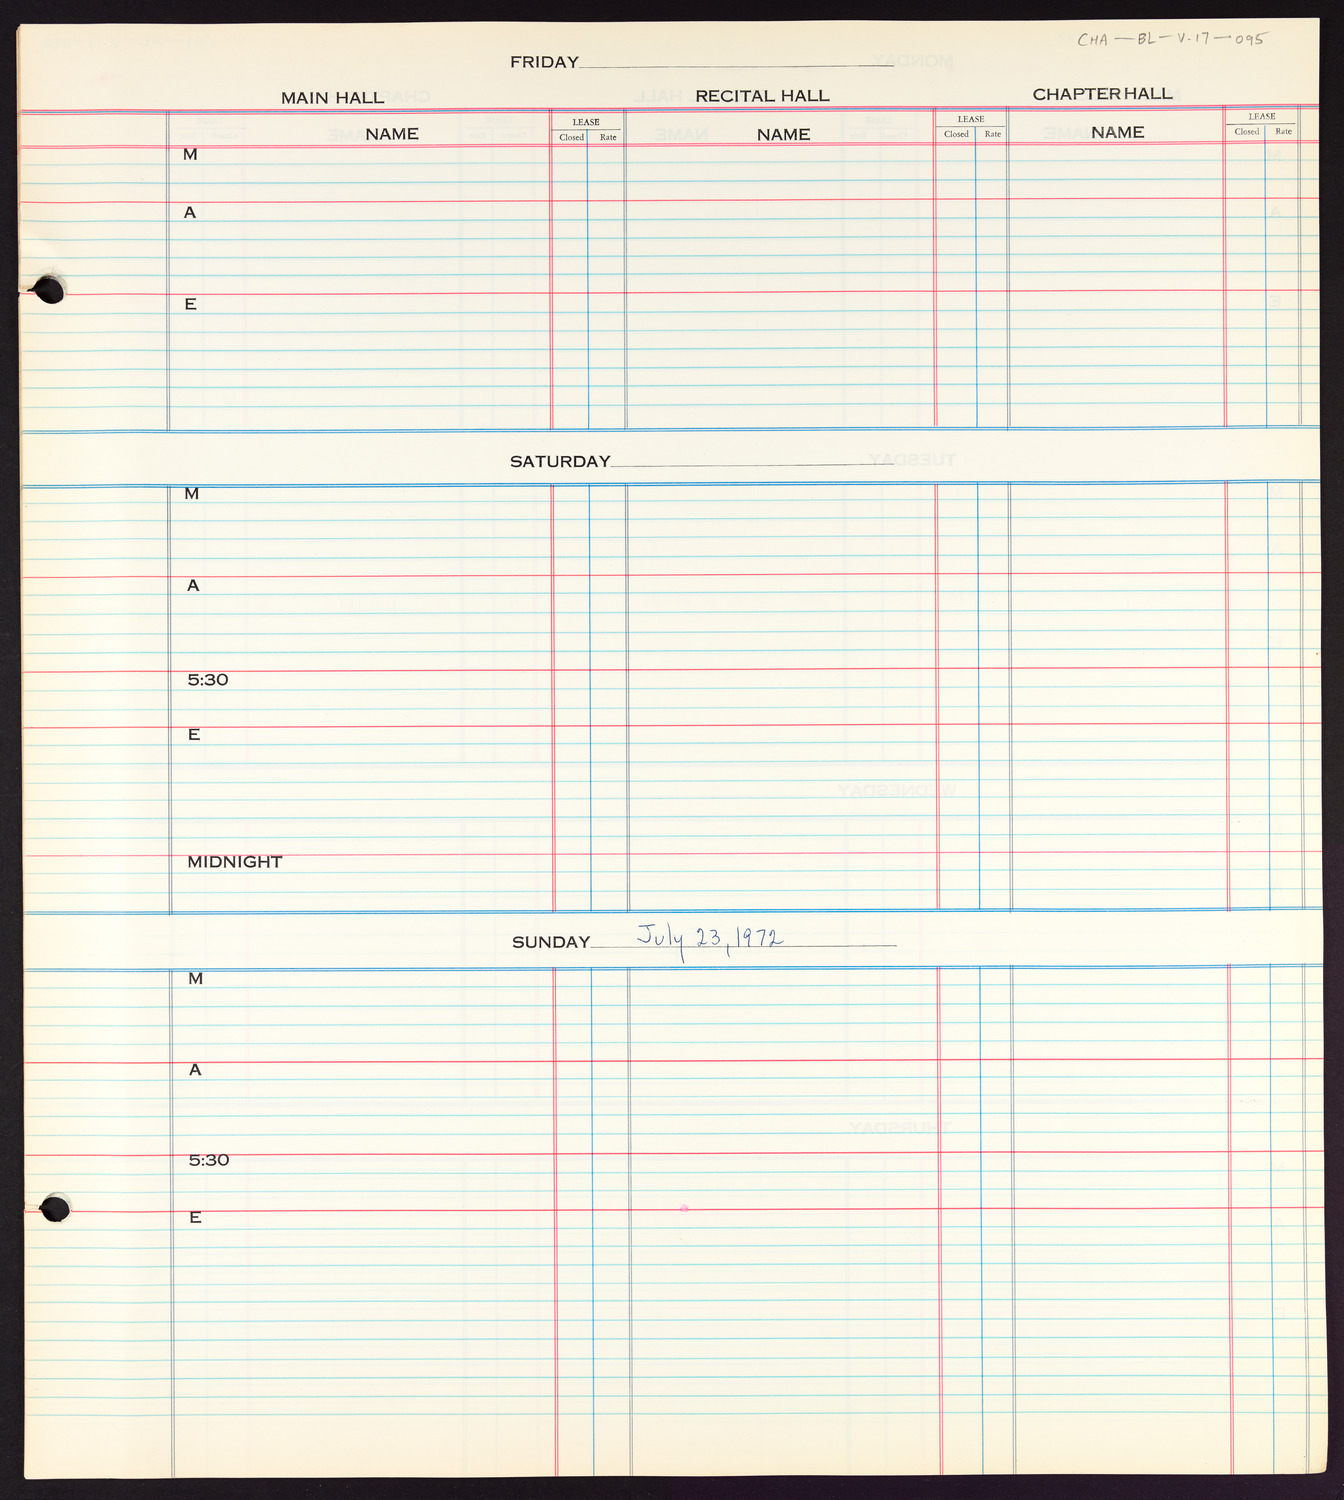 Carnegie Hall Booking Ledger, volume 17, page 95